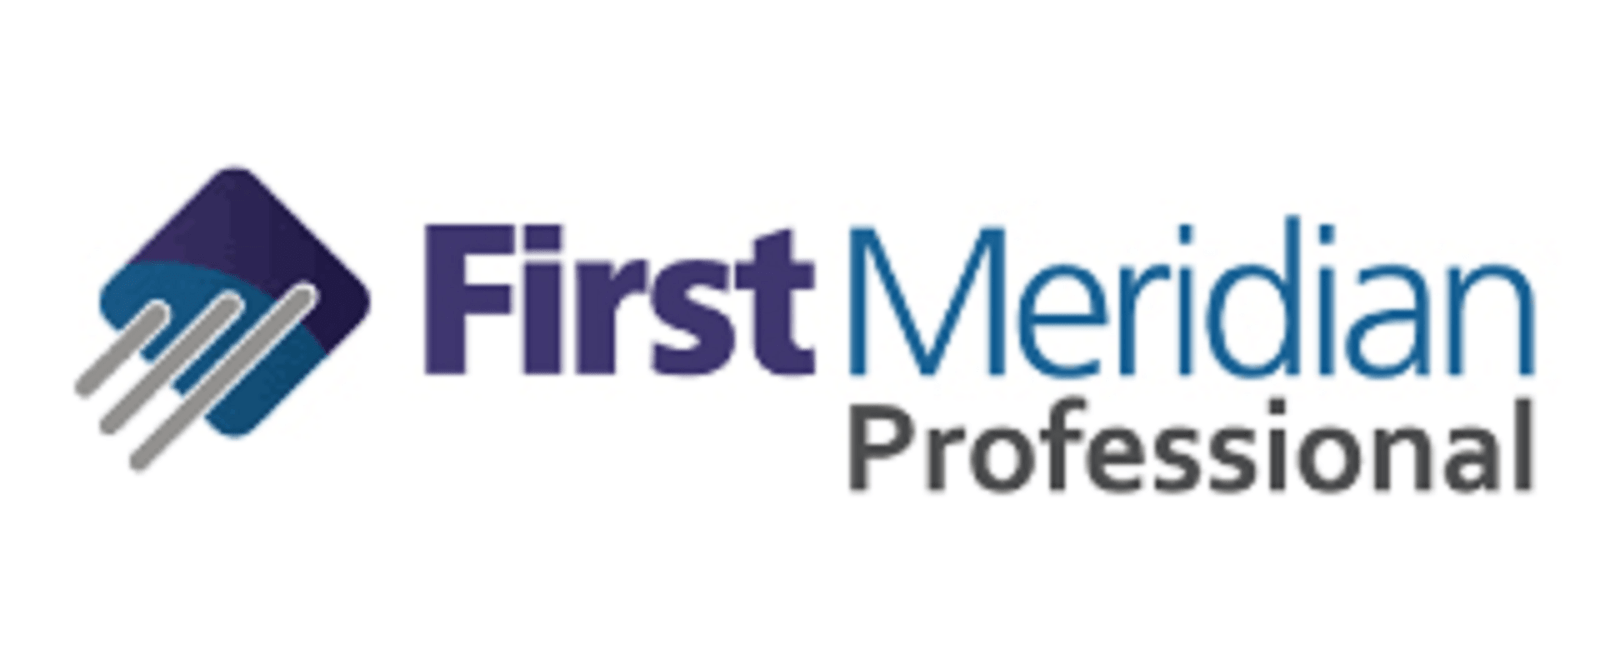 FirstMeridian Off Campus Drive